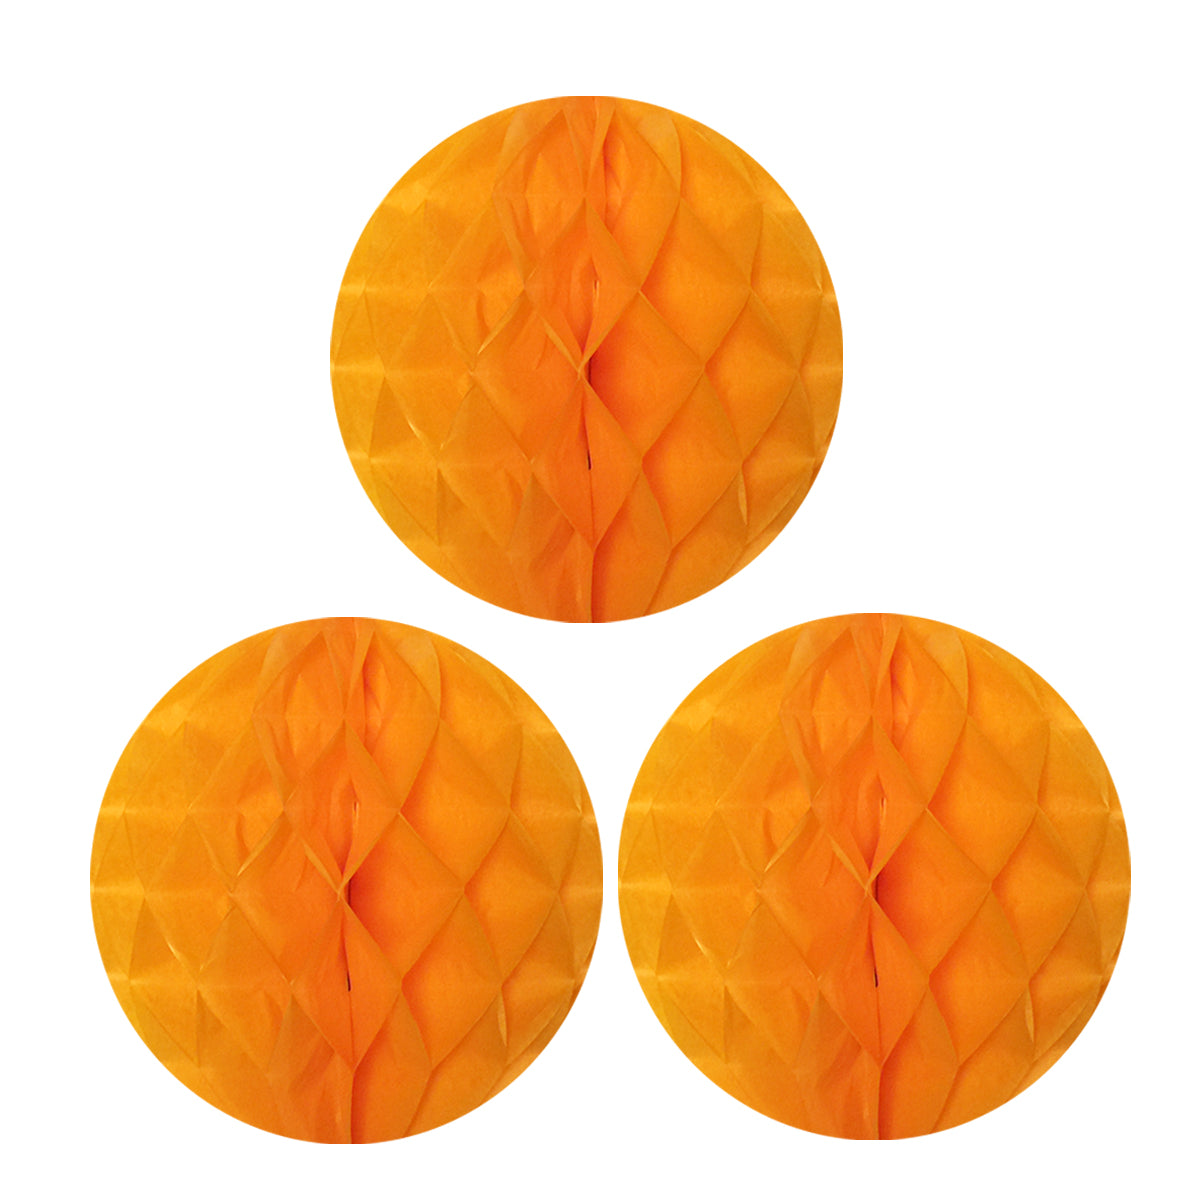 Wrapables 12" Set of 3 Tissue Honeycomb Ball Party Decorations